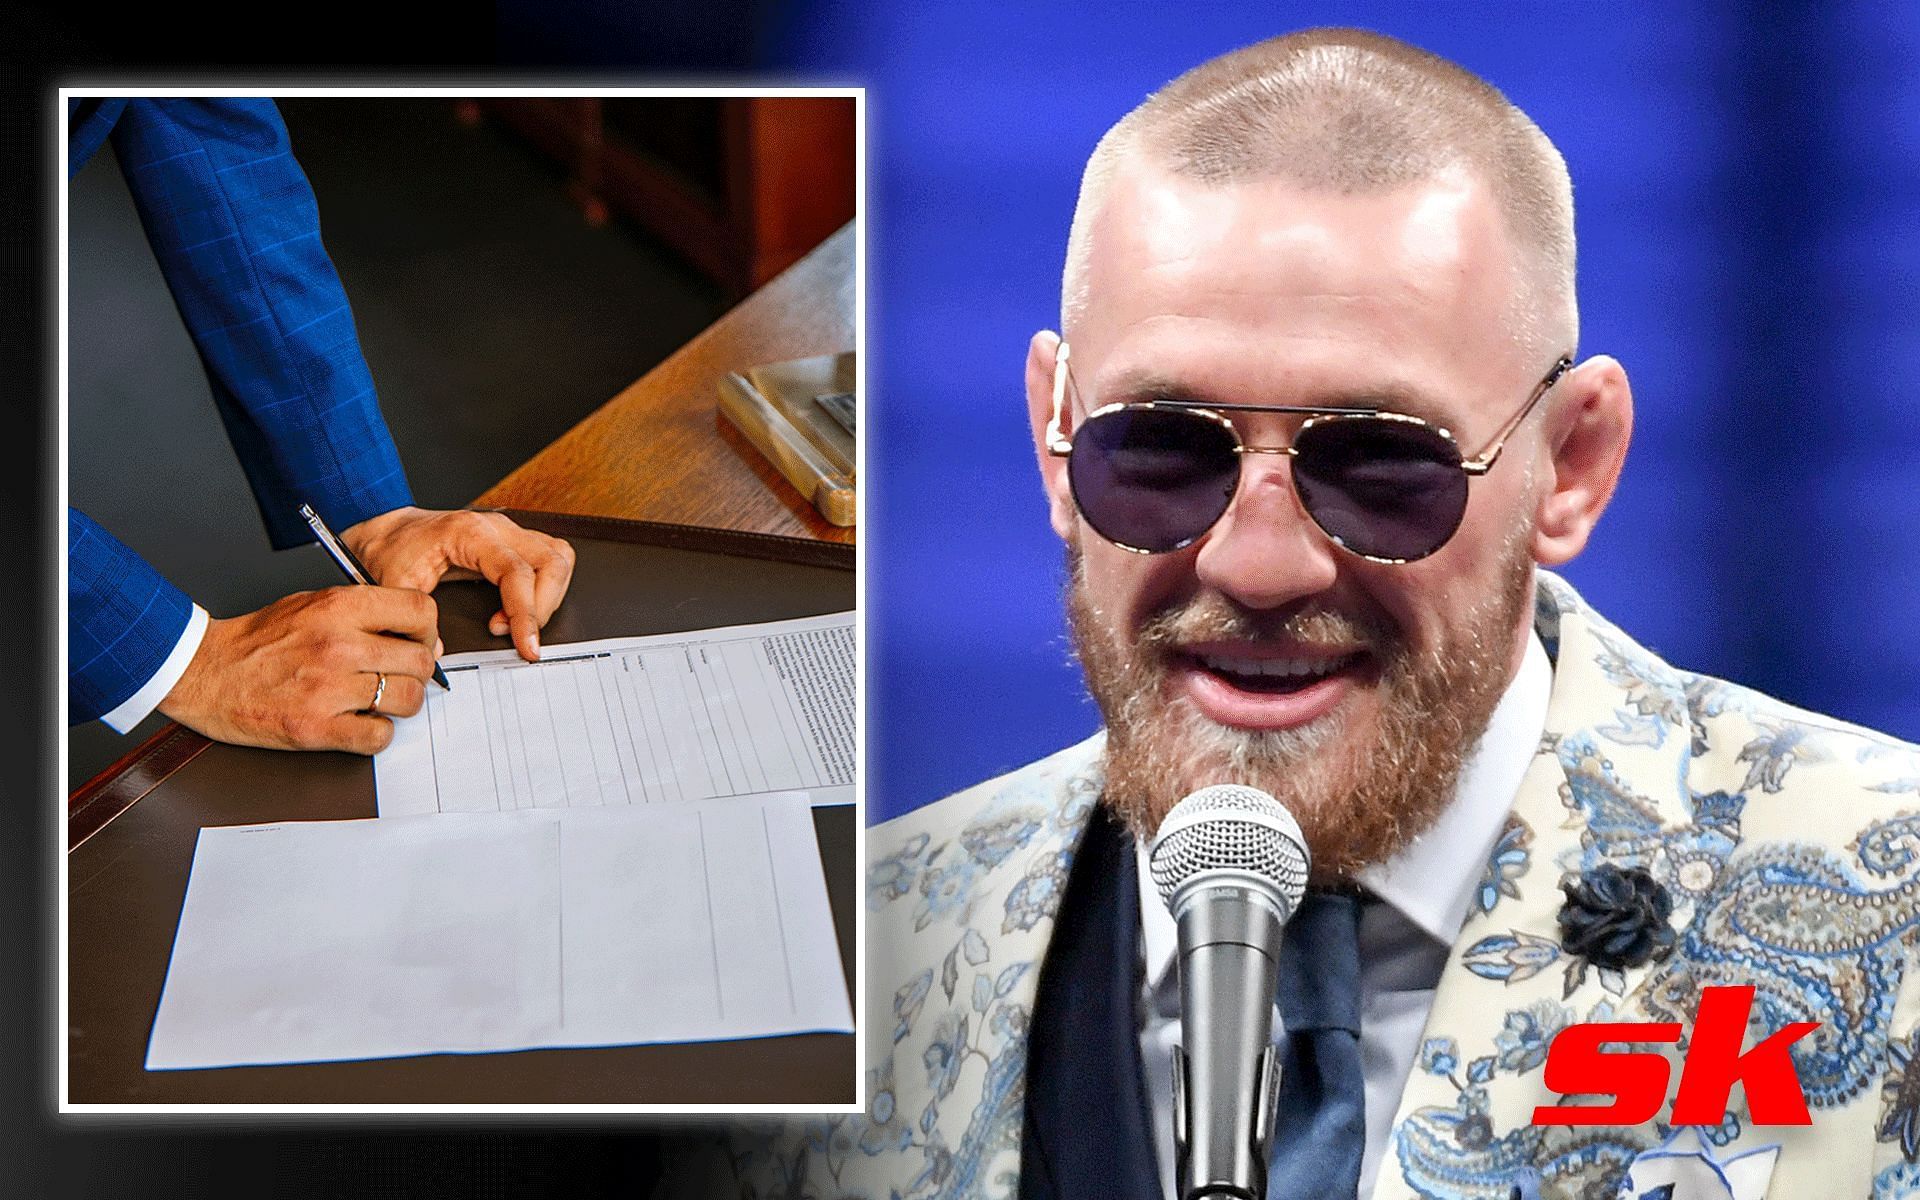 Conor McGregor reacts as Endeavor inches closer to buying the WWE [Image courtesy: unsplash.com, Getty]